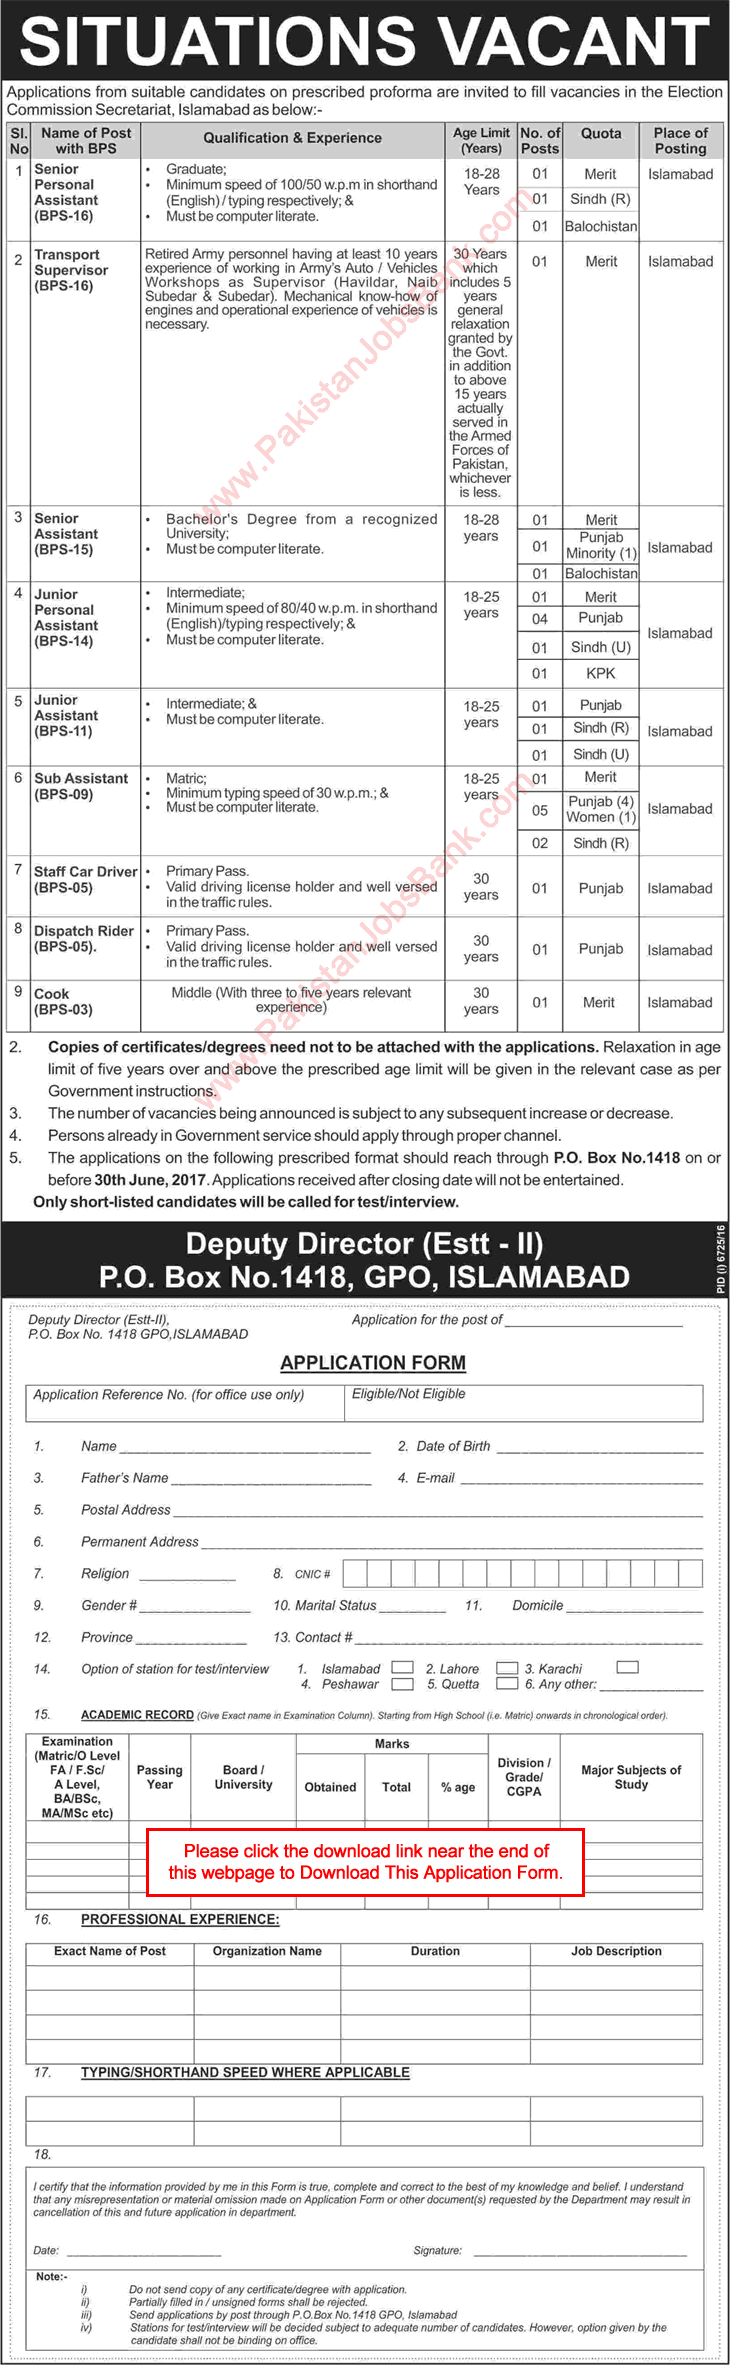 Election Commission of Pakistan Jobs June 2017 Islamabad Application Form Assistants, PA & Others ECP Latest